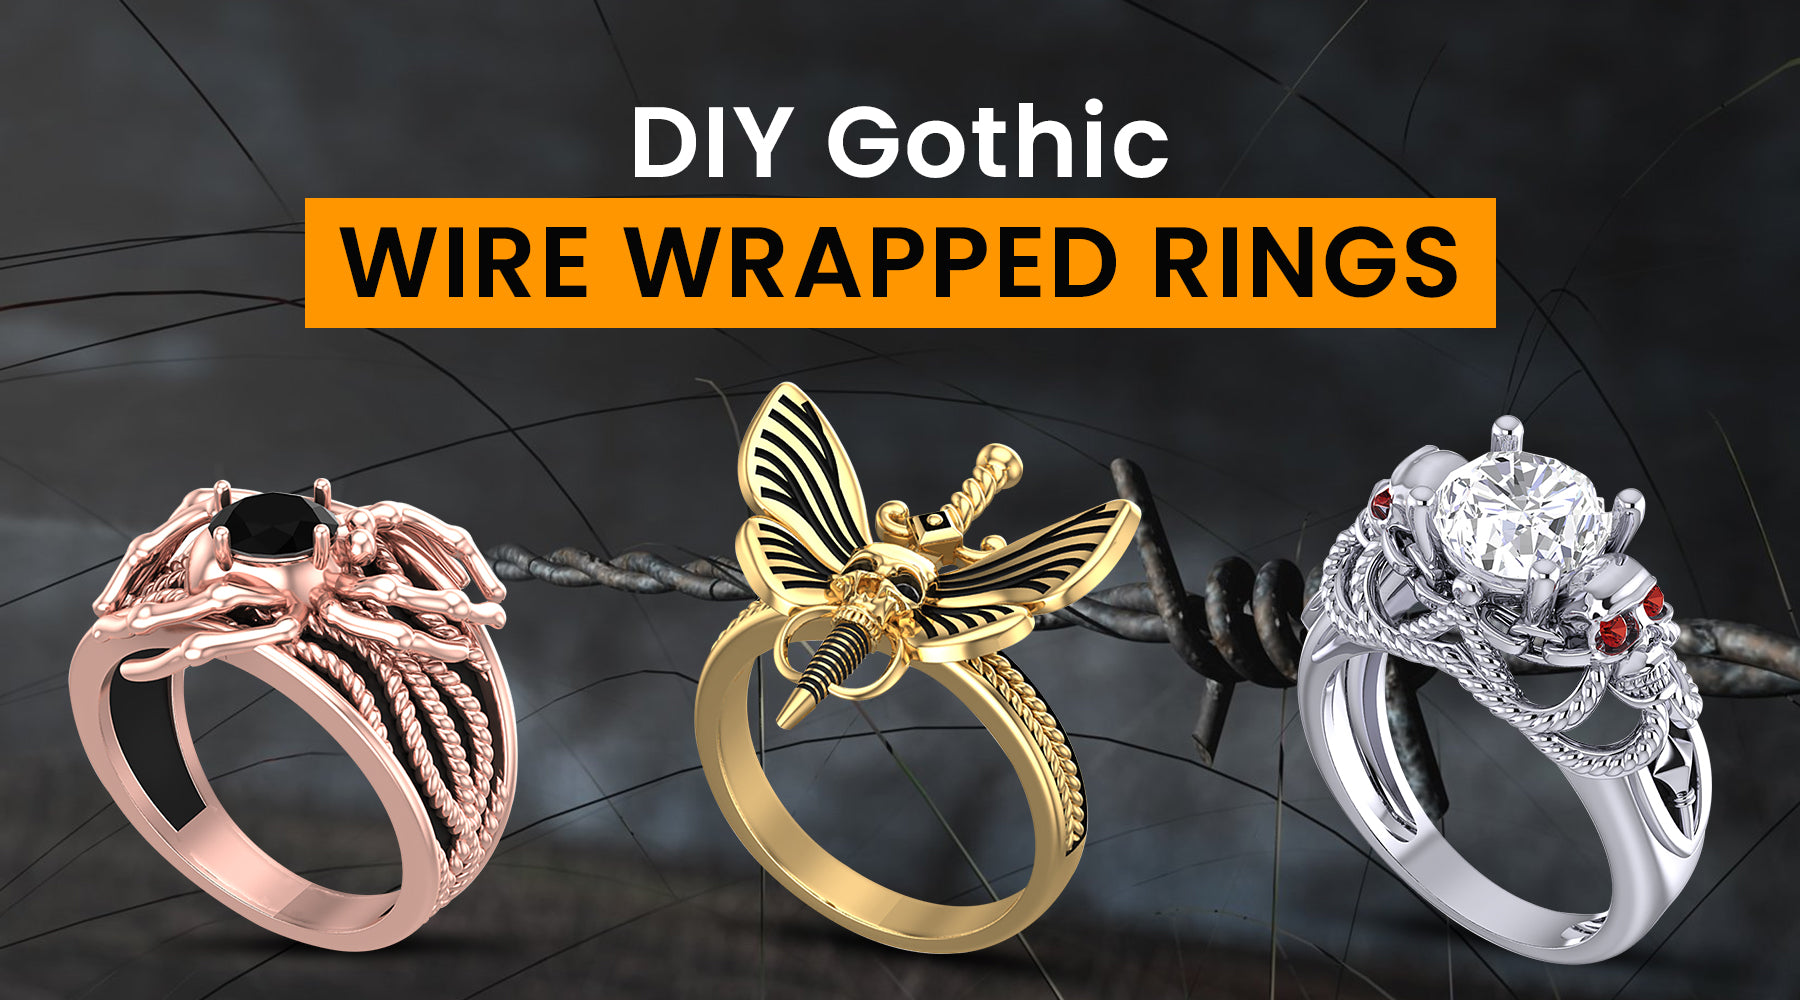 DIY Gothic Wire Wrapped Rings: A Step-by-Step Guide